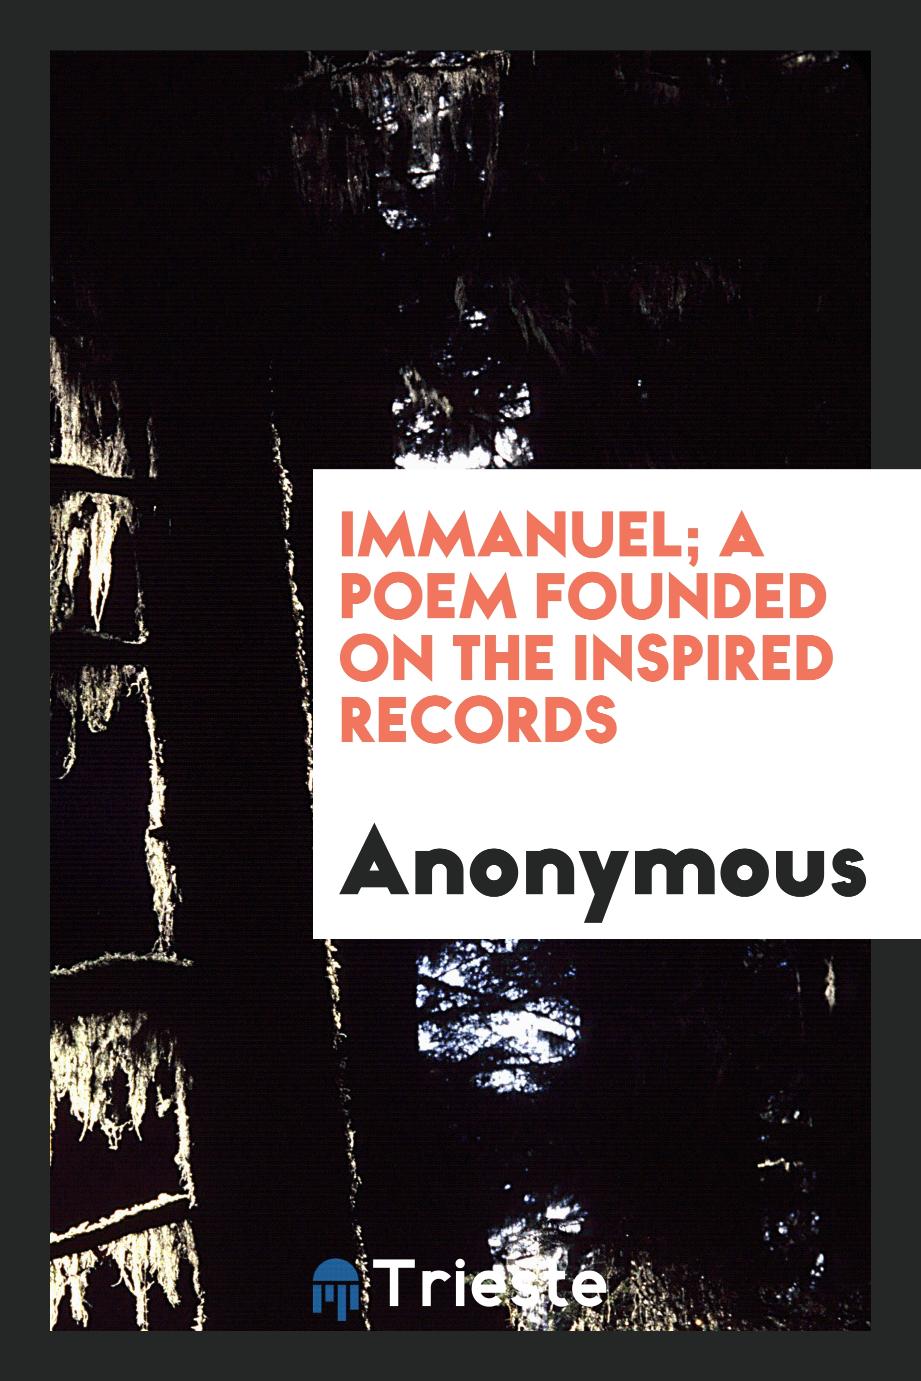 Immanuel; a poem founded on the inspired records